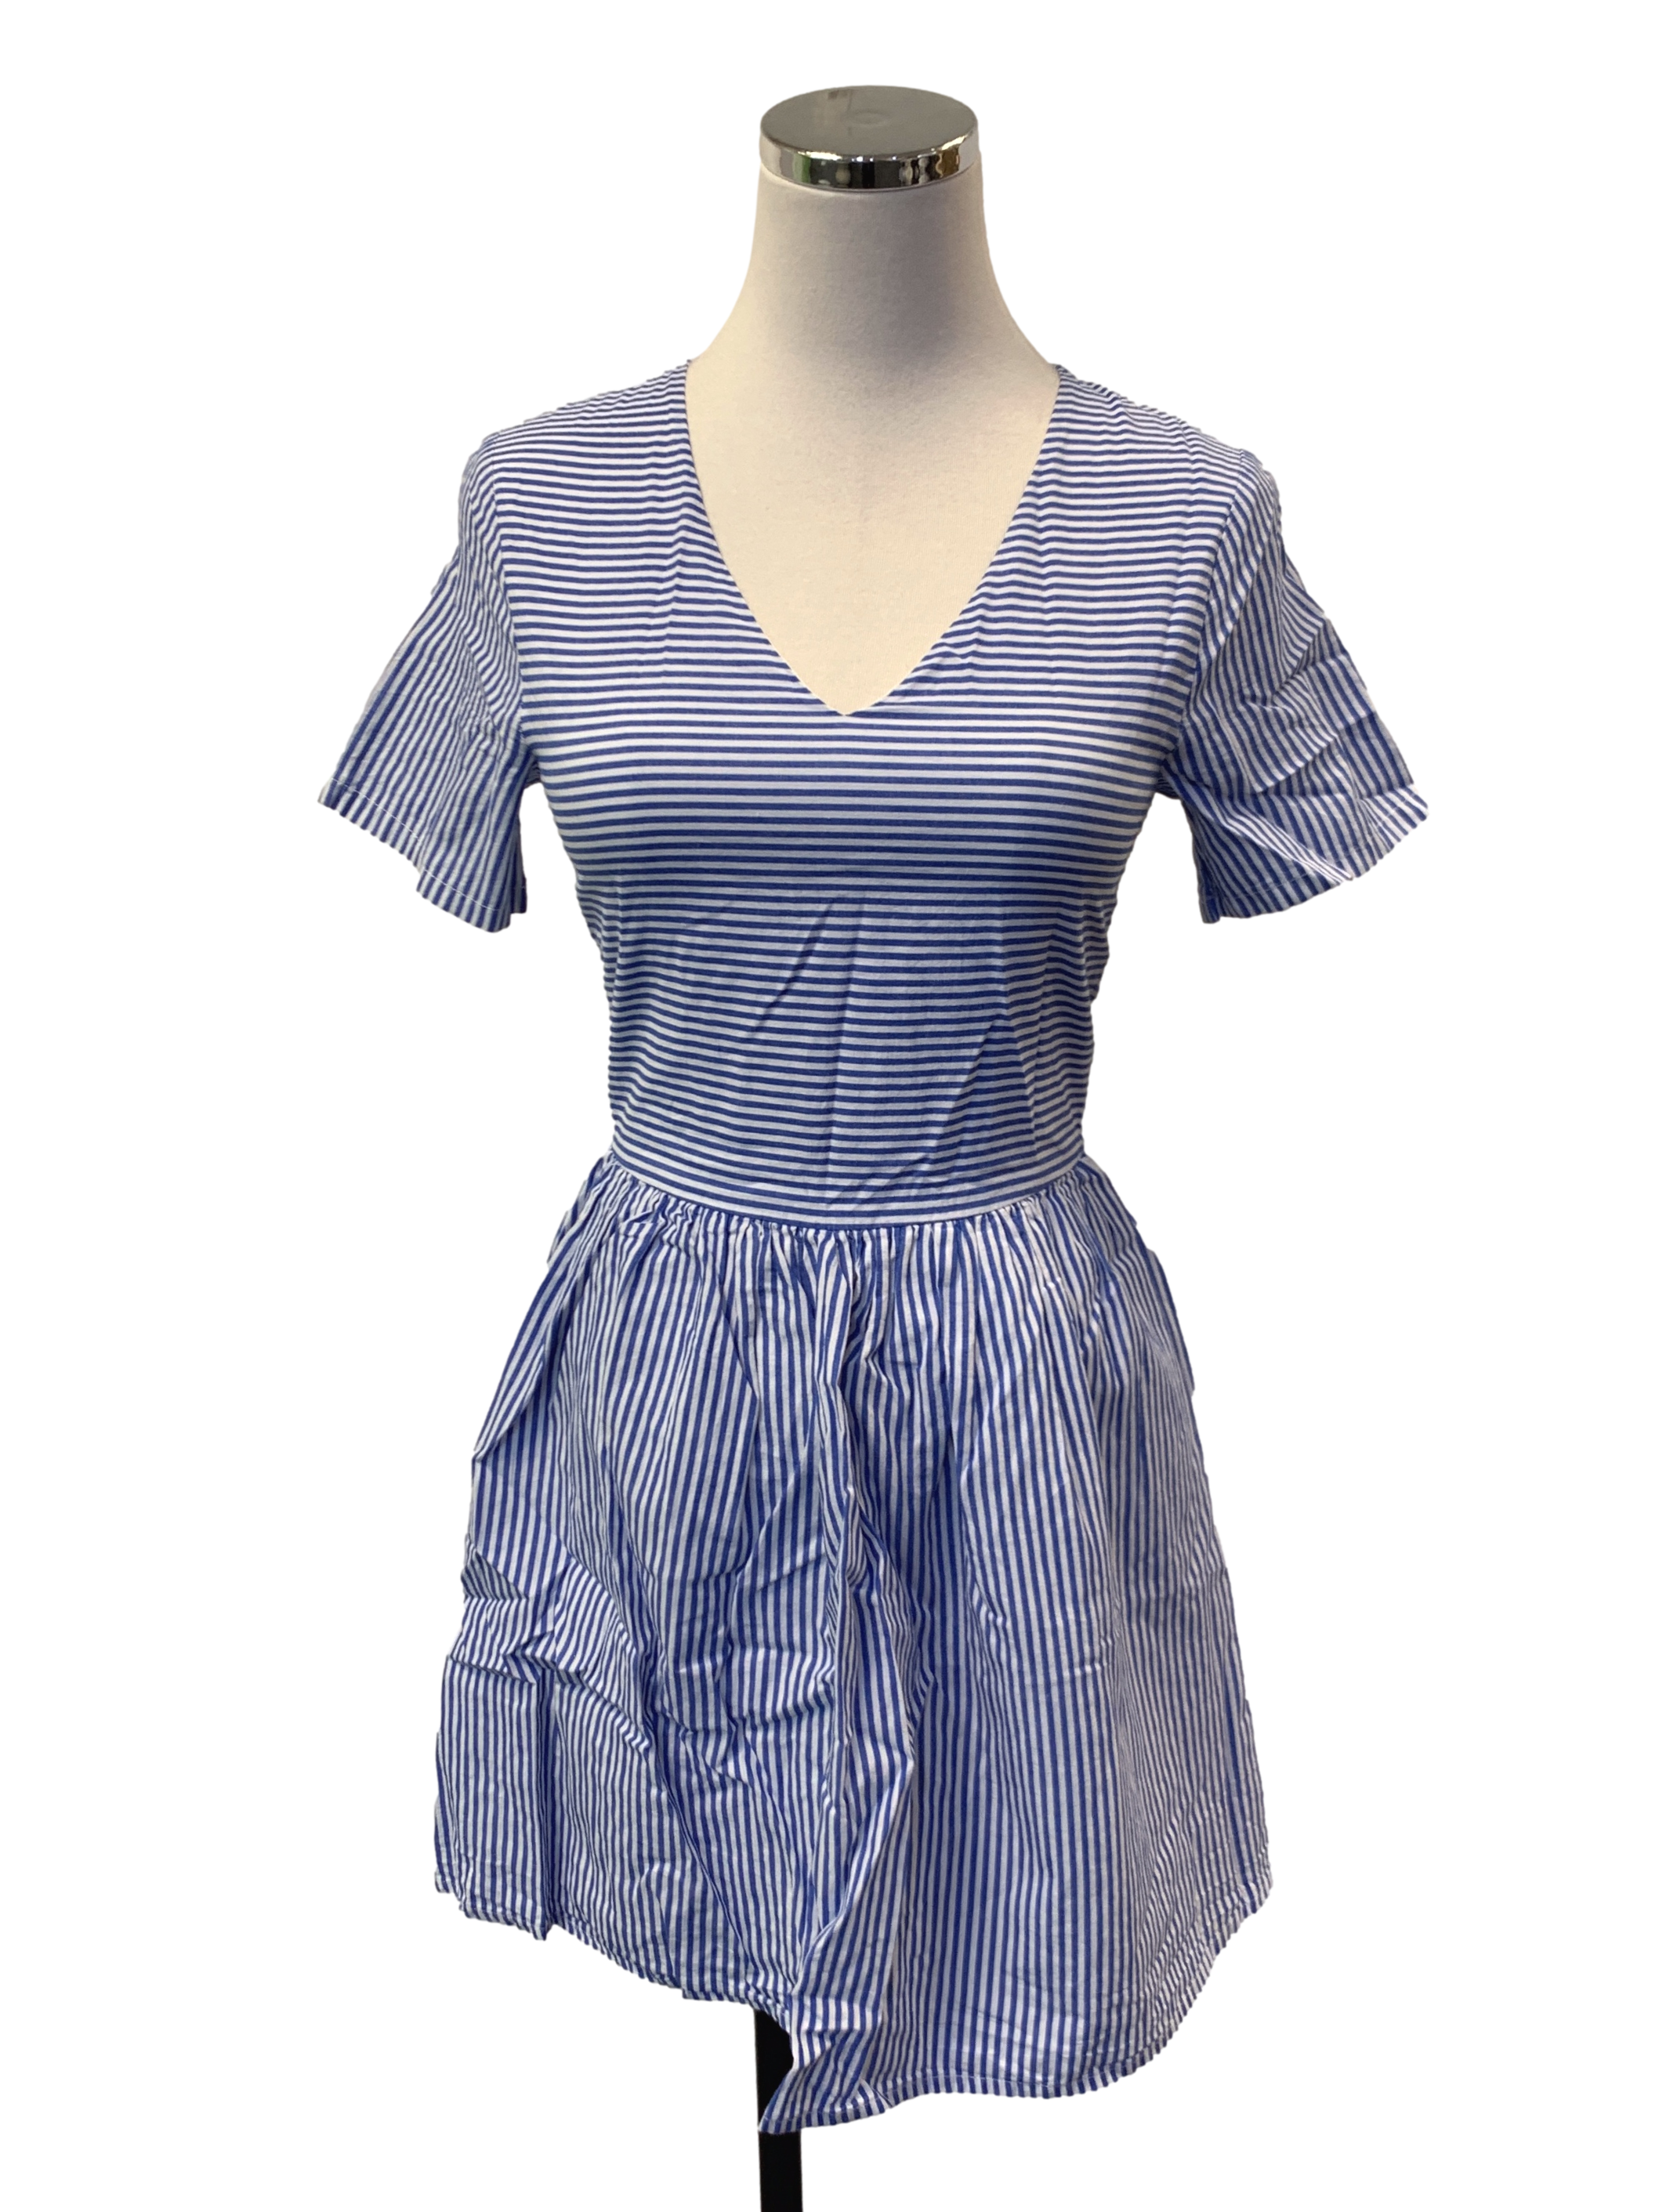 Blue and White Striped Dress